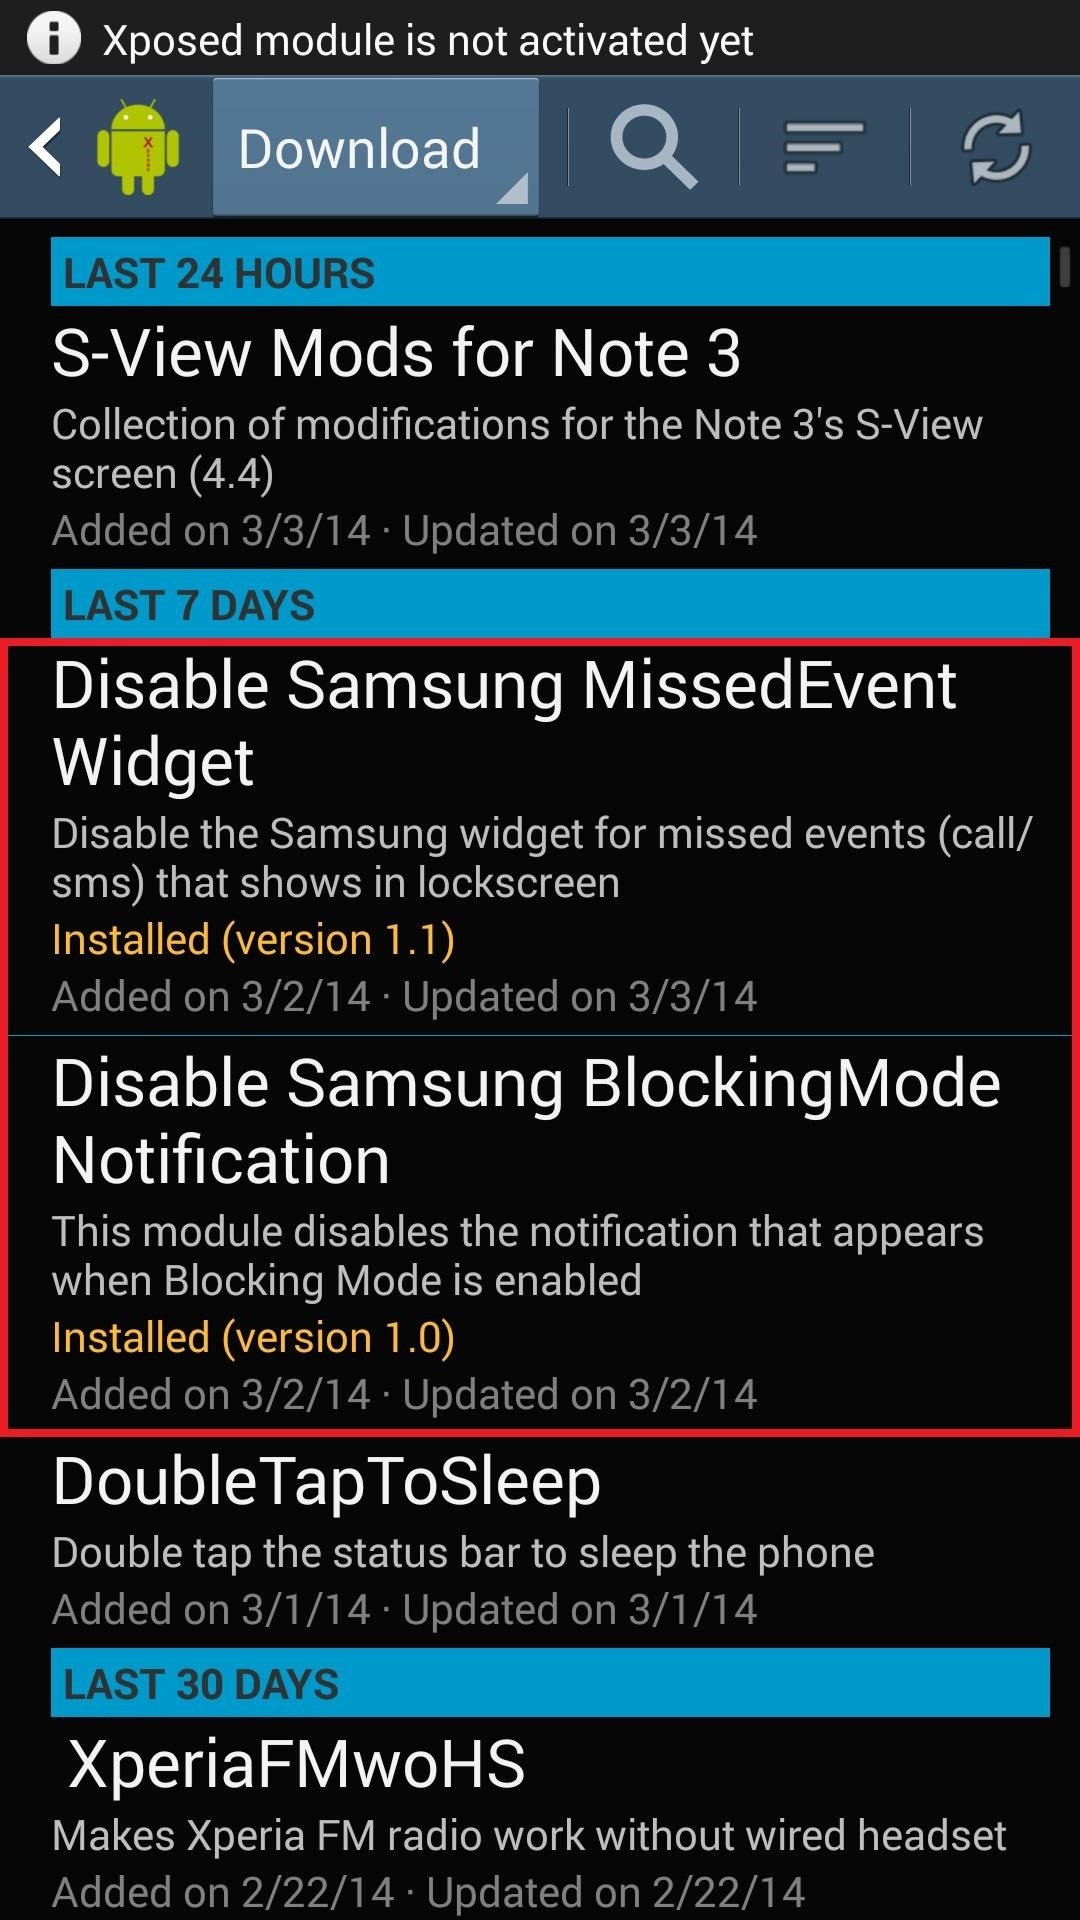 How to Disable the Missed Event Widget & “Blocking Mode On” Notification for the Galaxy Note 3